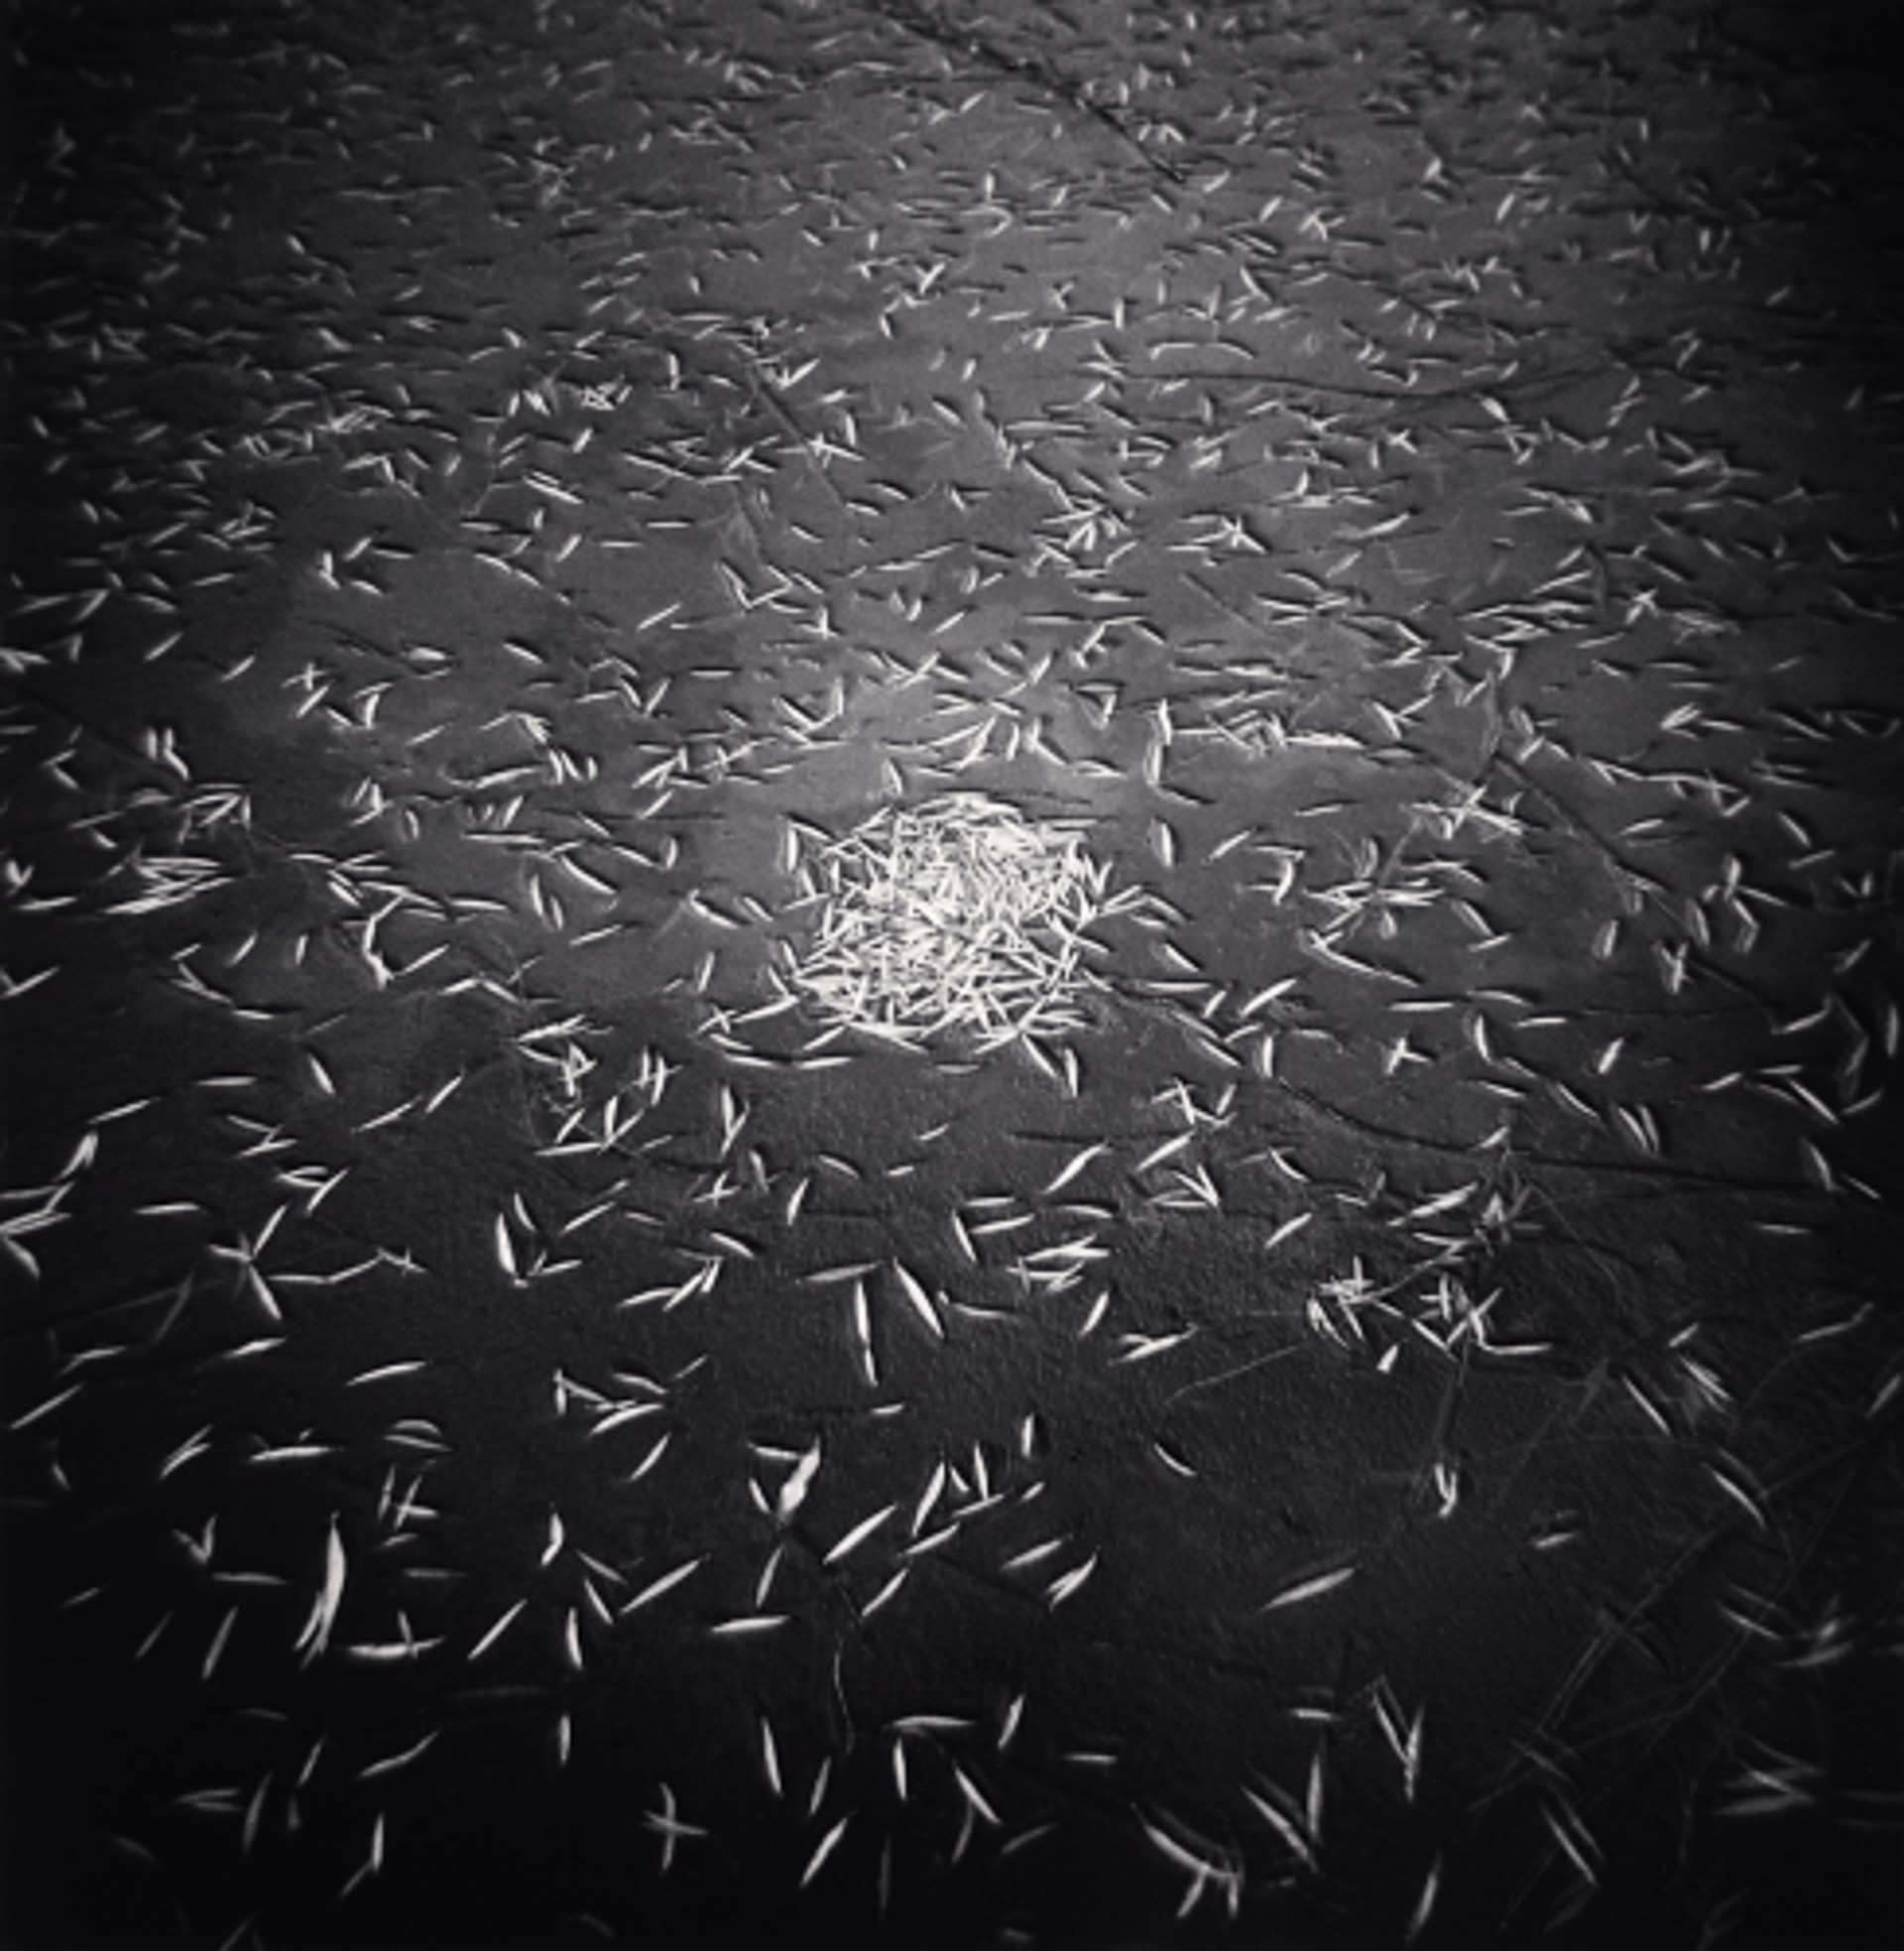 Fallen Leaves, Beijing (edition of 25) by Michael Kenna